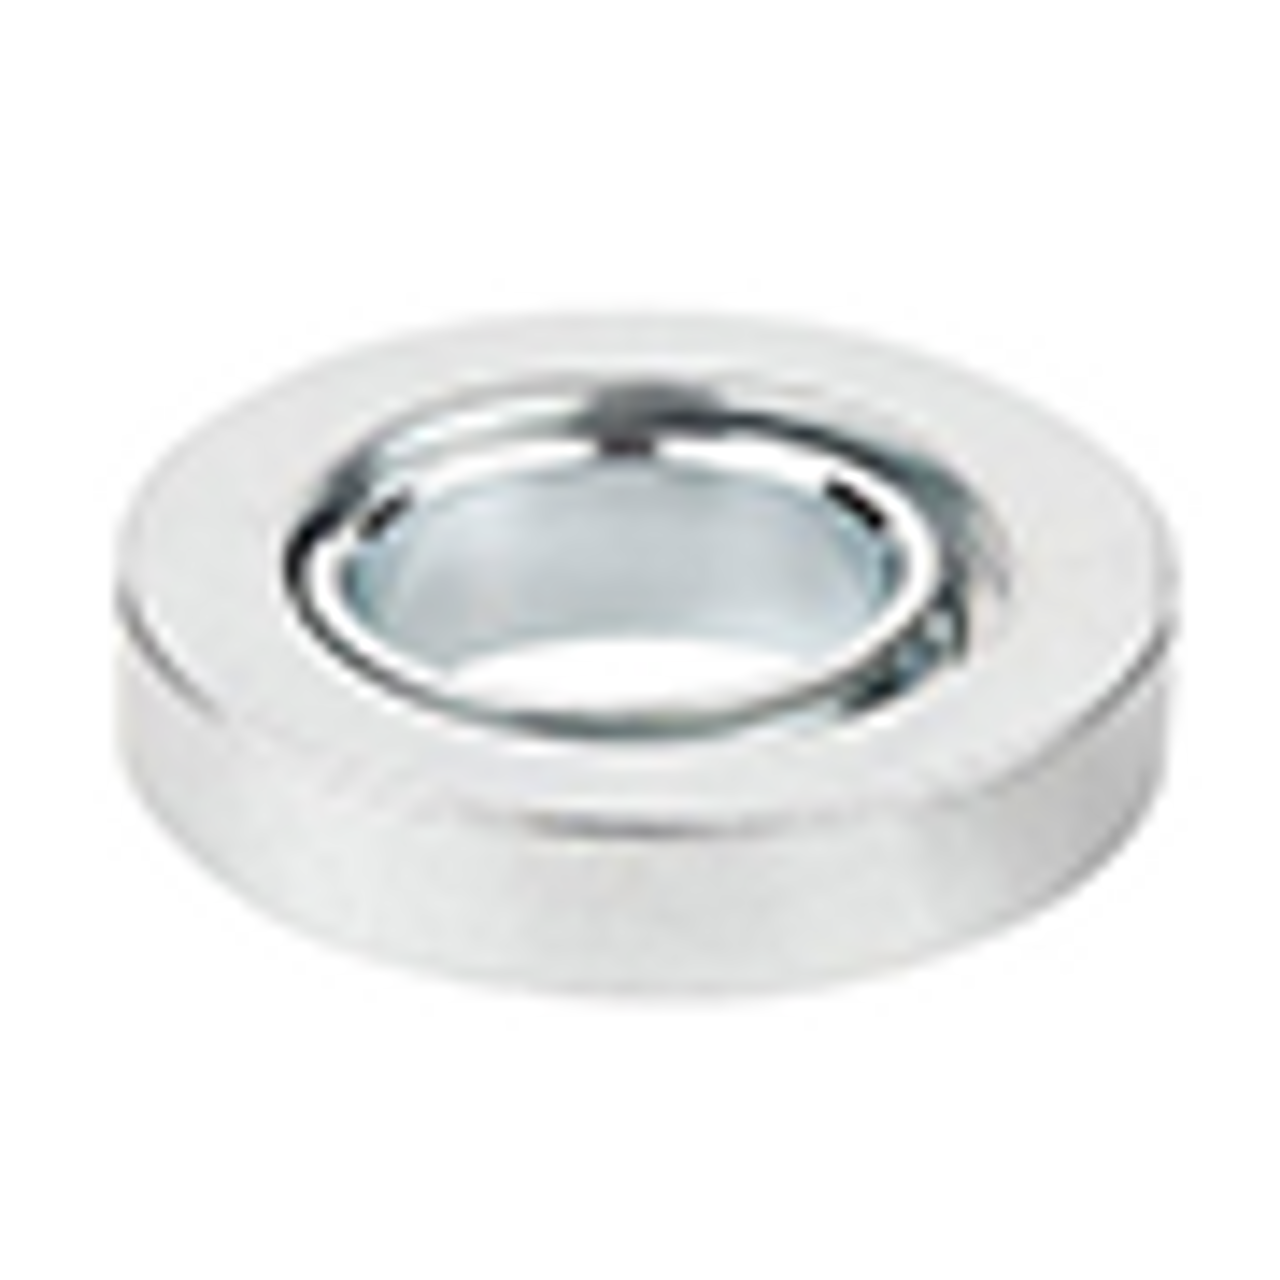 Metal Washer Companies  Metal Washer Suppliers